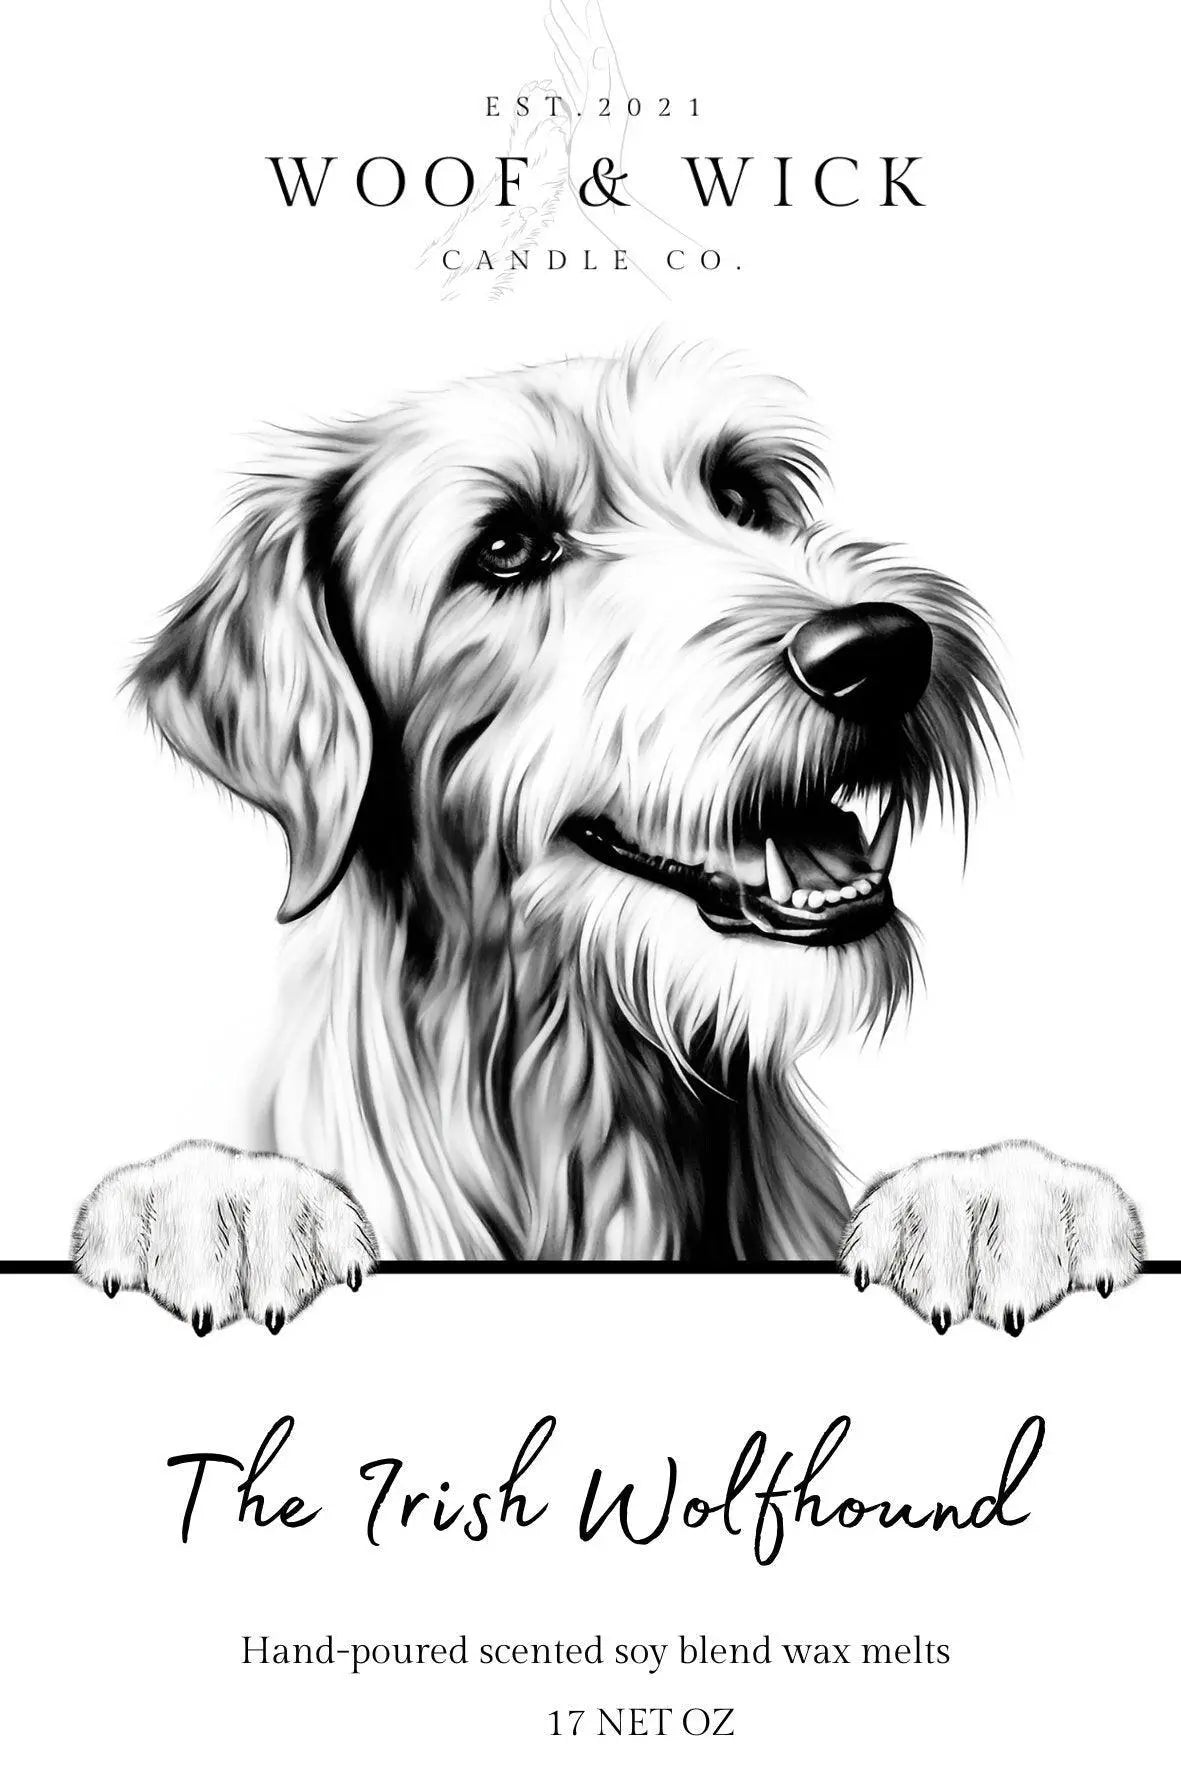 The Irish Wolf Hound - Personalized Dog Breed Soy Wax Melts for Wax Warmers - Woof & Wick Candle Co.